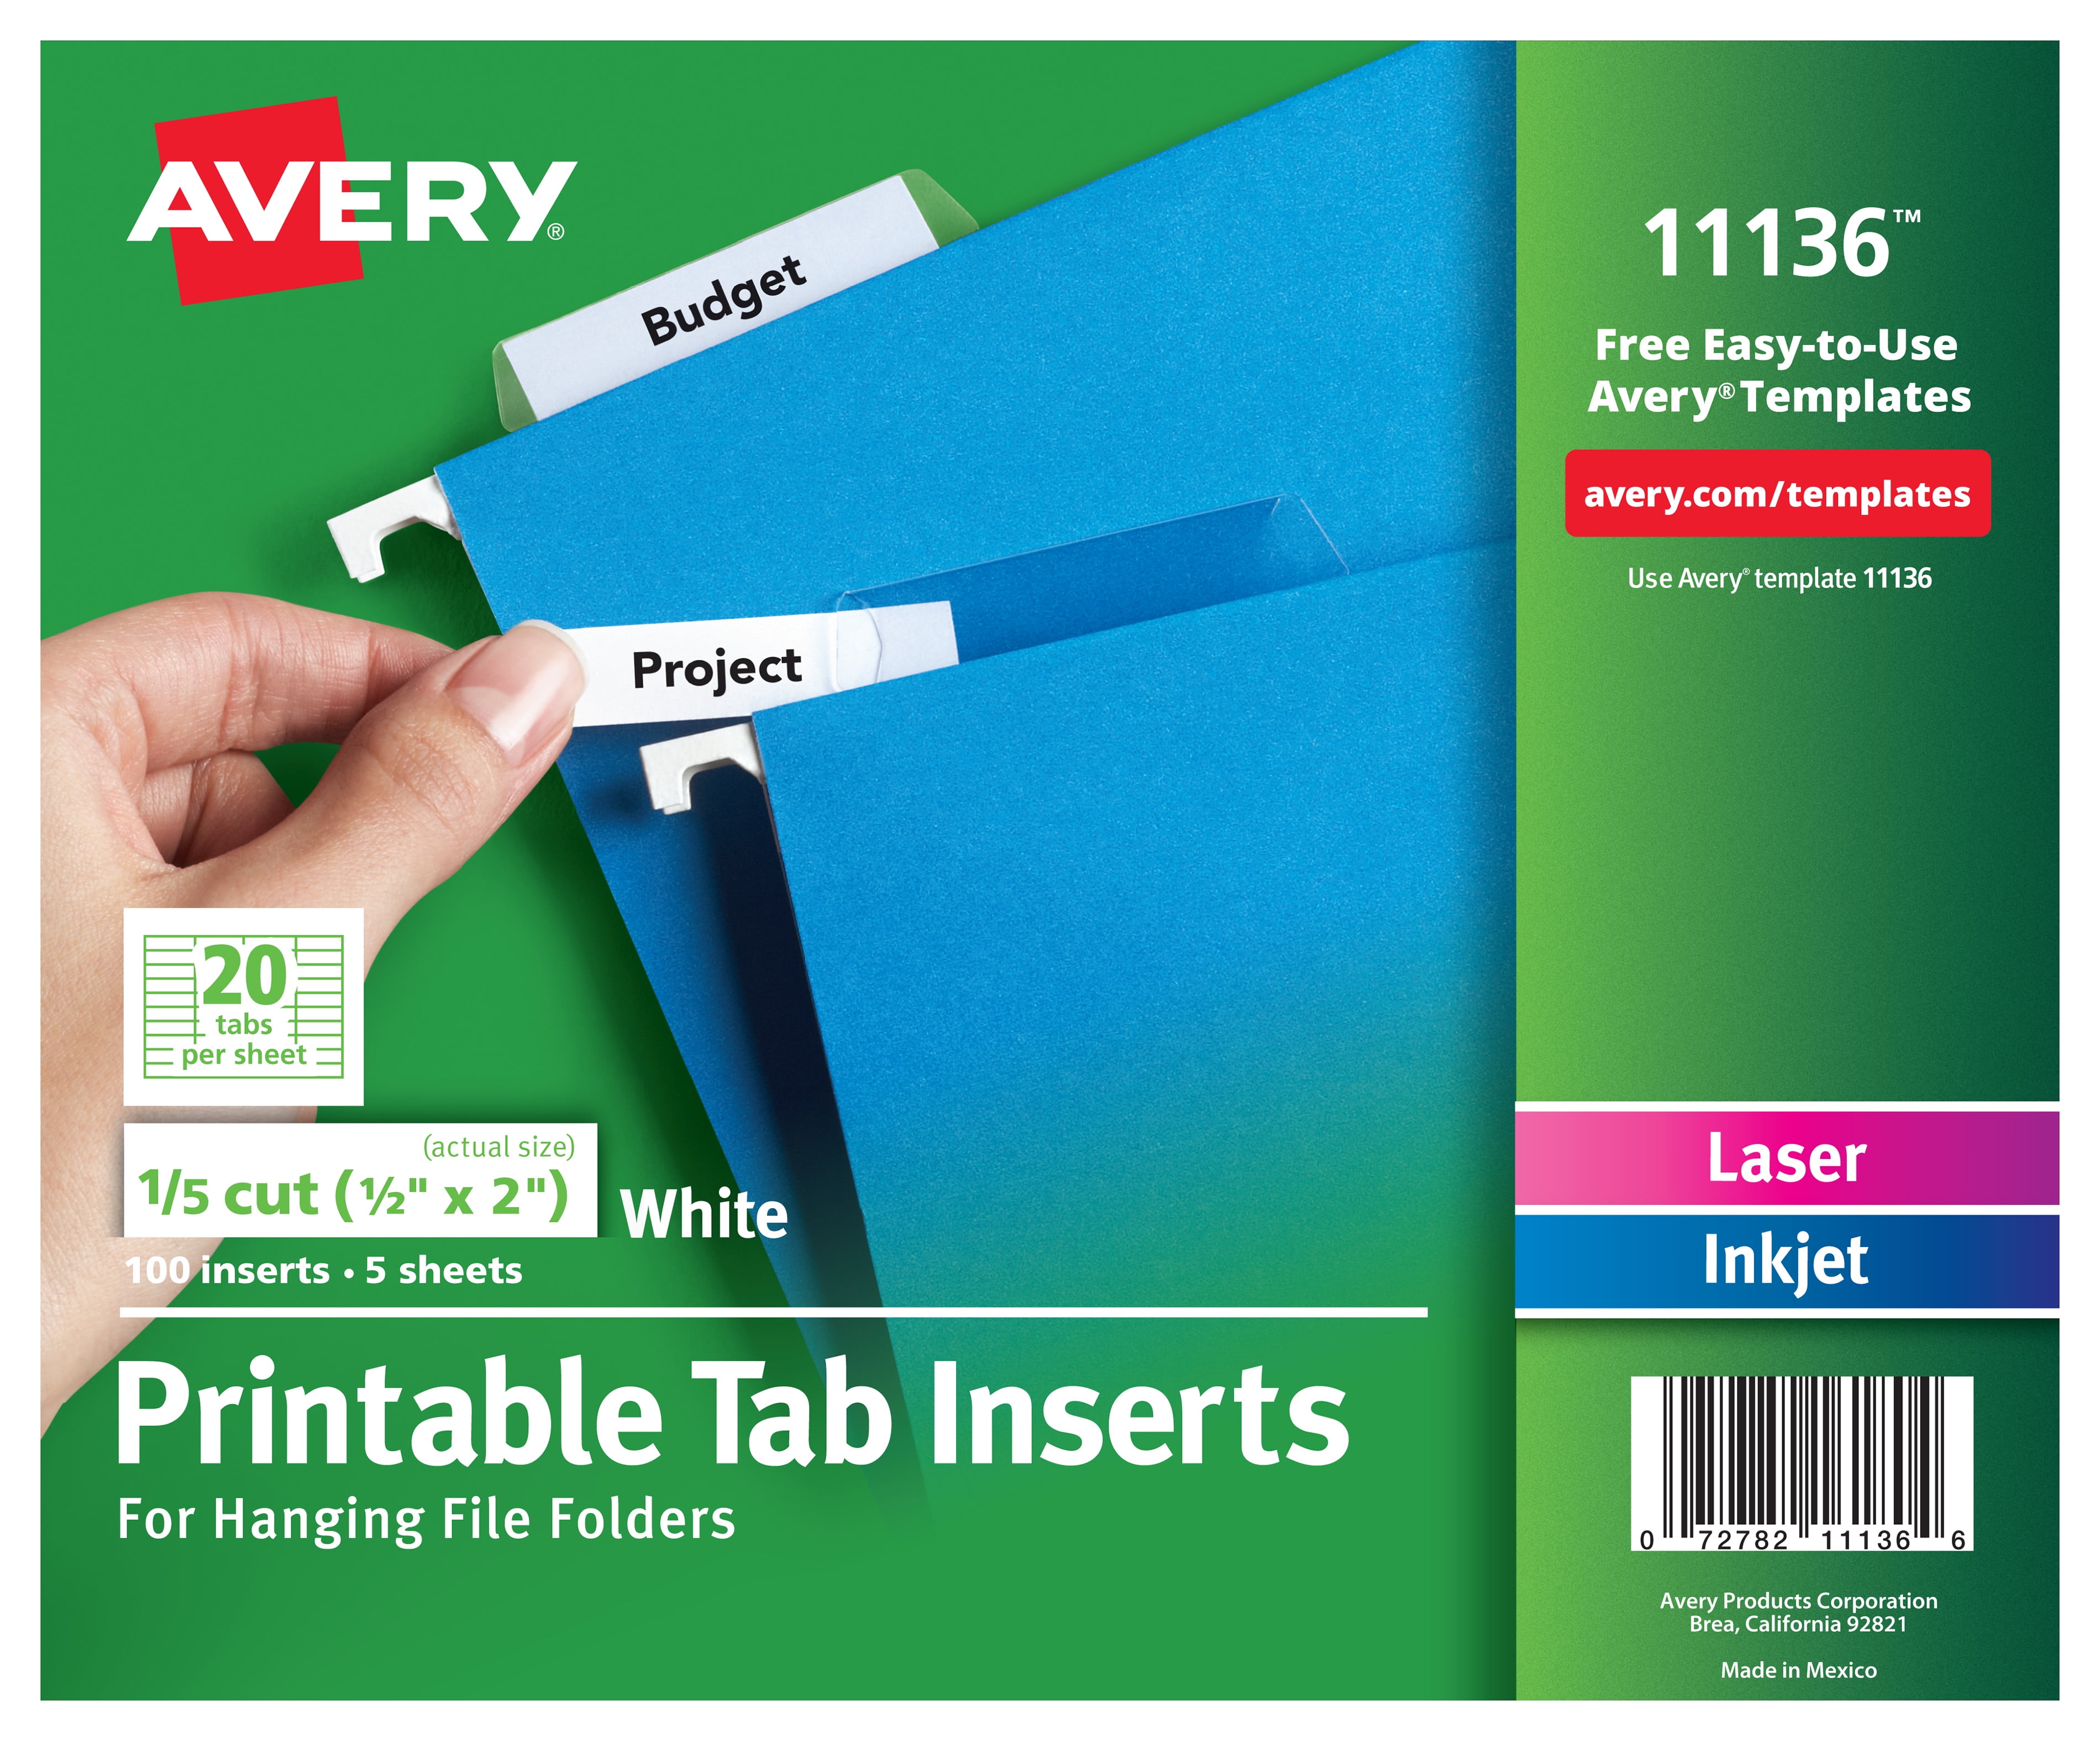 Avery Printable Tab Inserts for Hanging File Folders, 23/23" Cut, 2300 Pack With Hanging File Folder Label Template